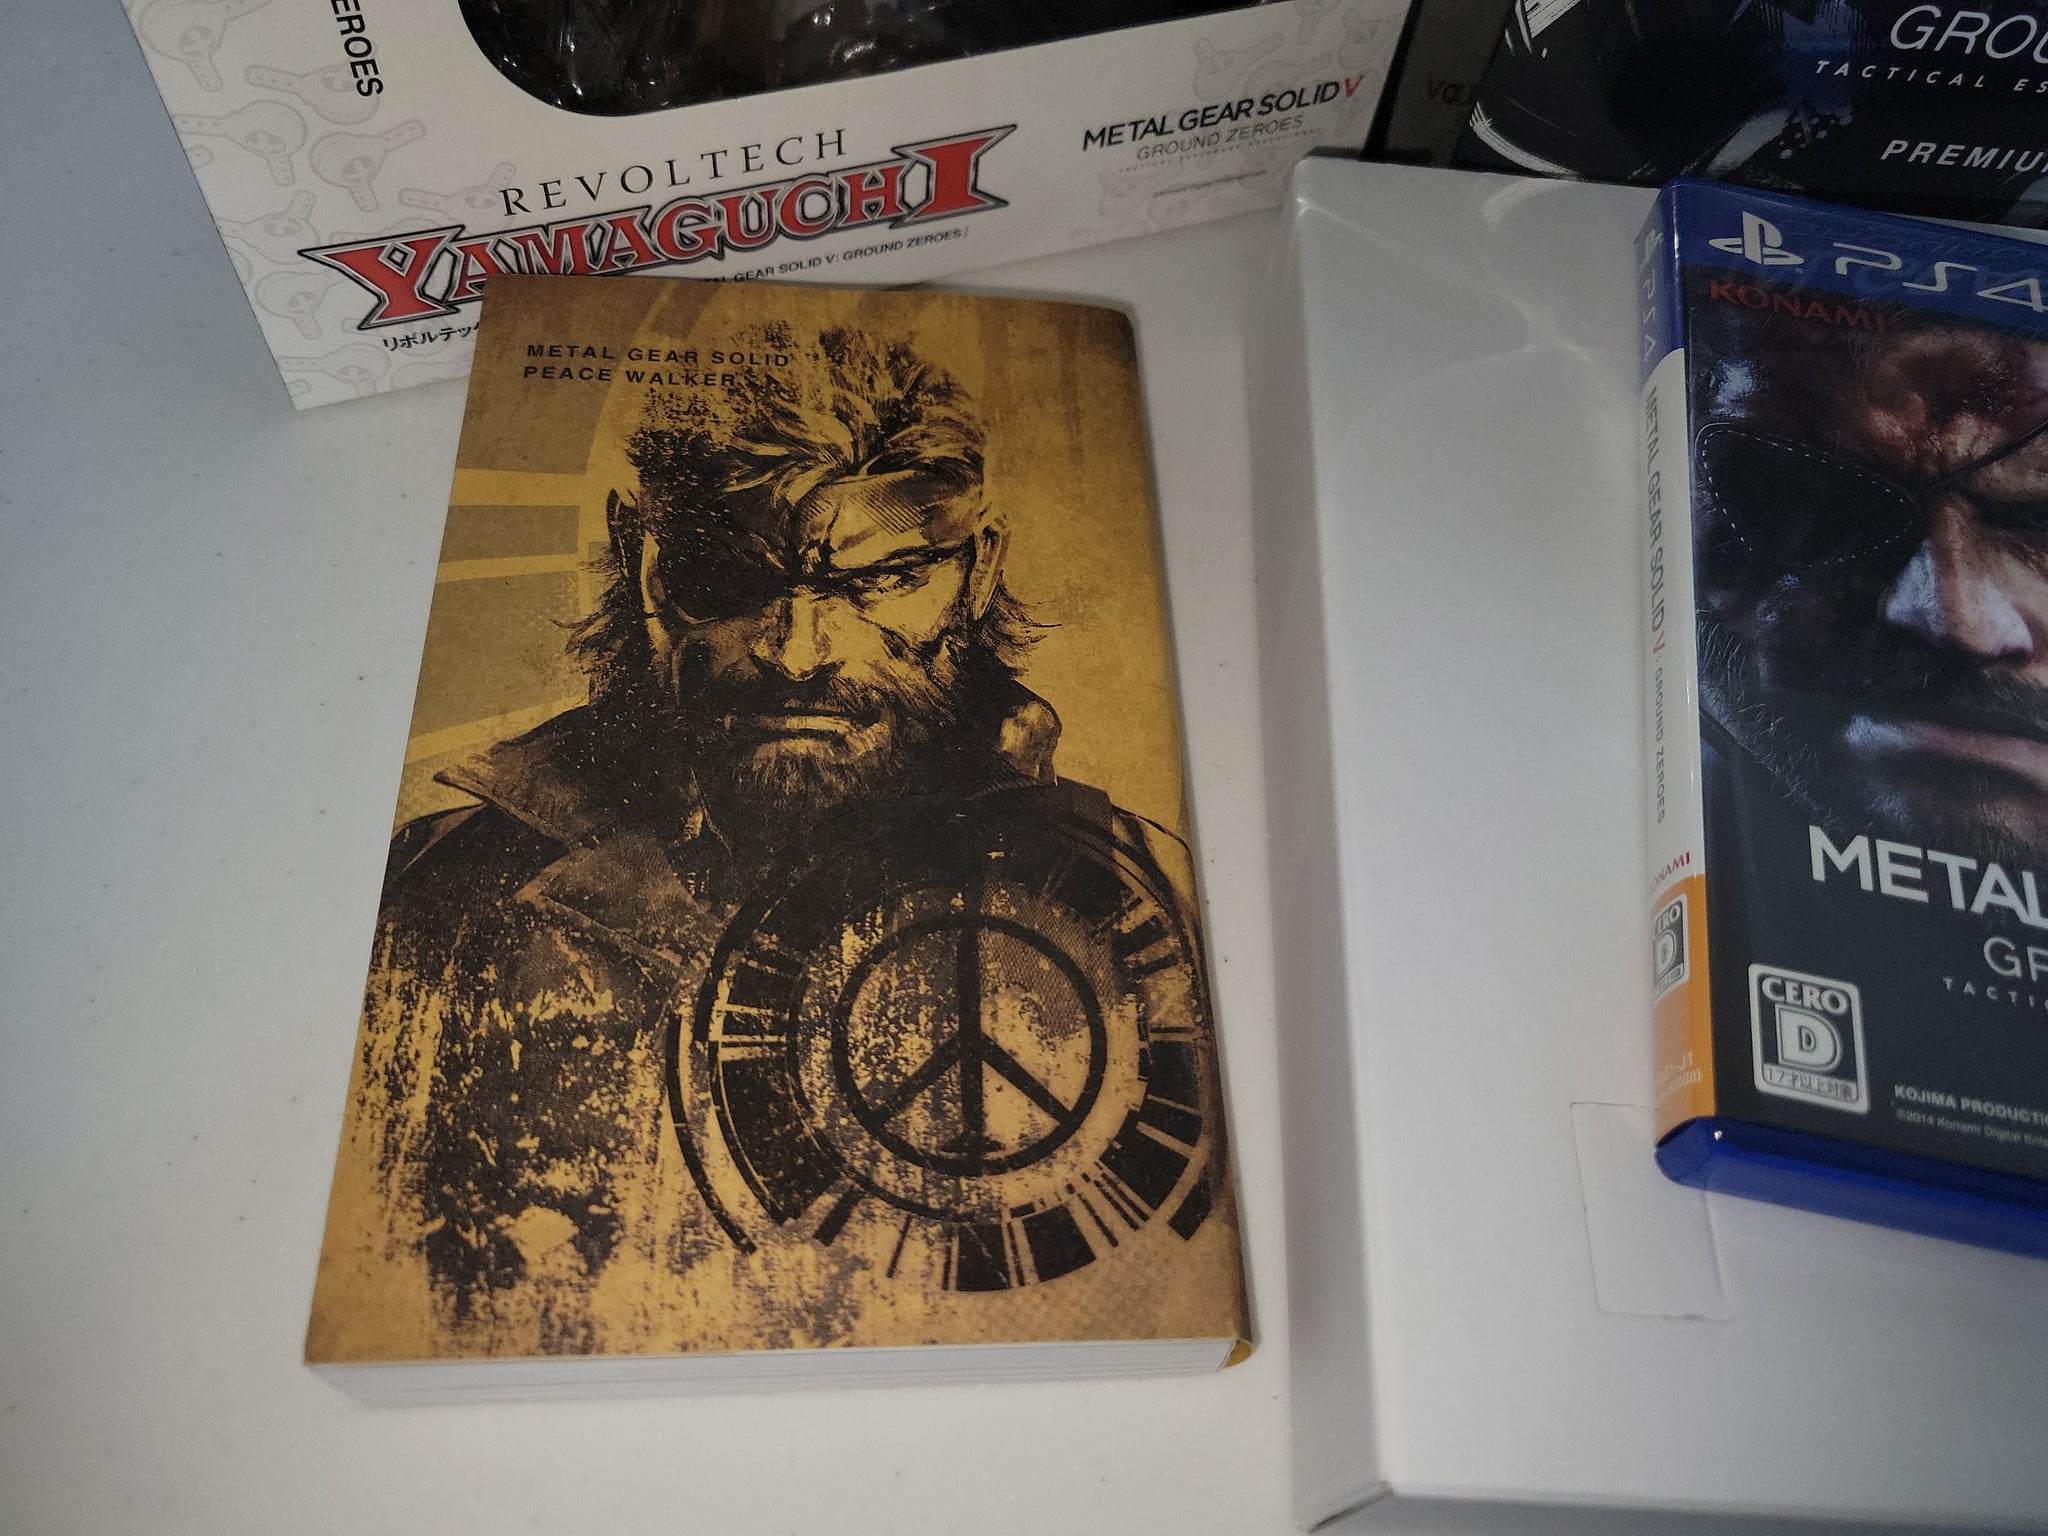 Metal Gear Solid V: Ground Zeroes Premium Package - Sony PS4 Playstation 4